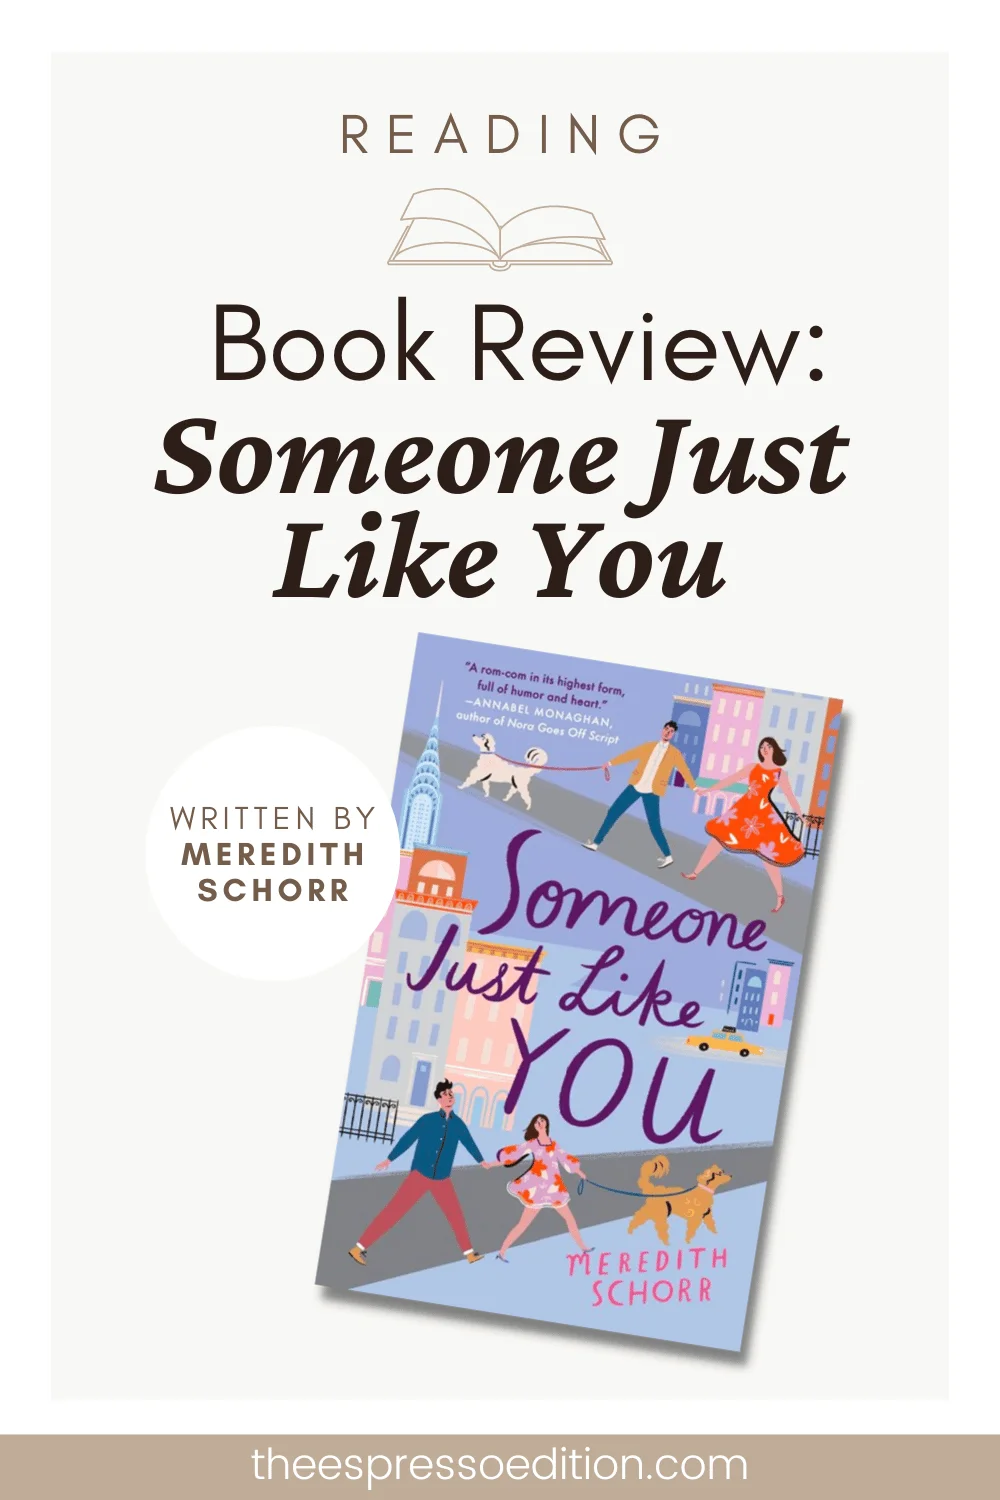 Book Review: Someone Just Like You by Meredith Schorr by The Espresso Edition cozy bookish blog